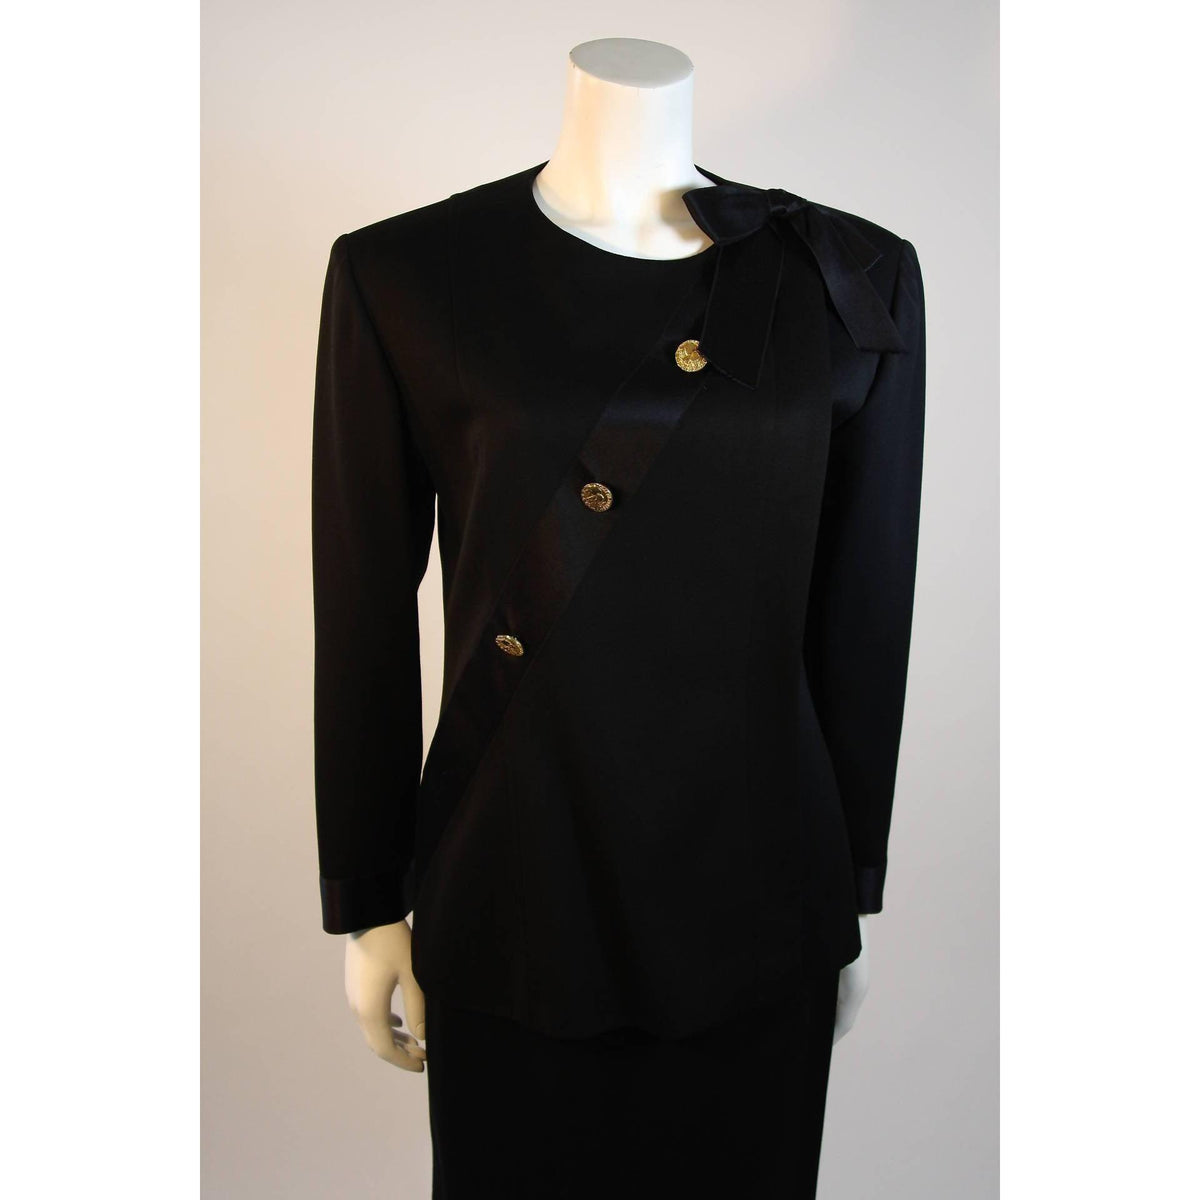 Chanel 1990's Black Wool Silk Ribbon Jacket and Skirt Suit | Size FR 36